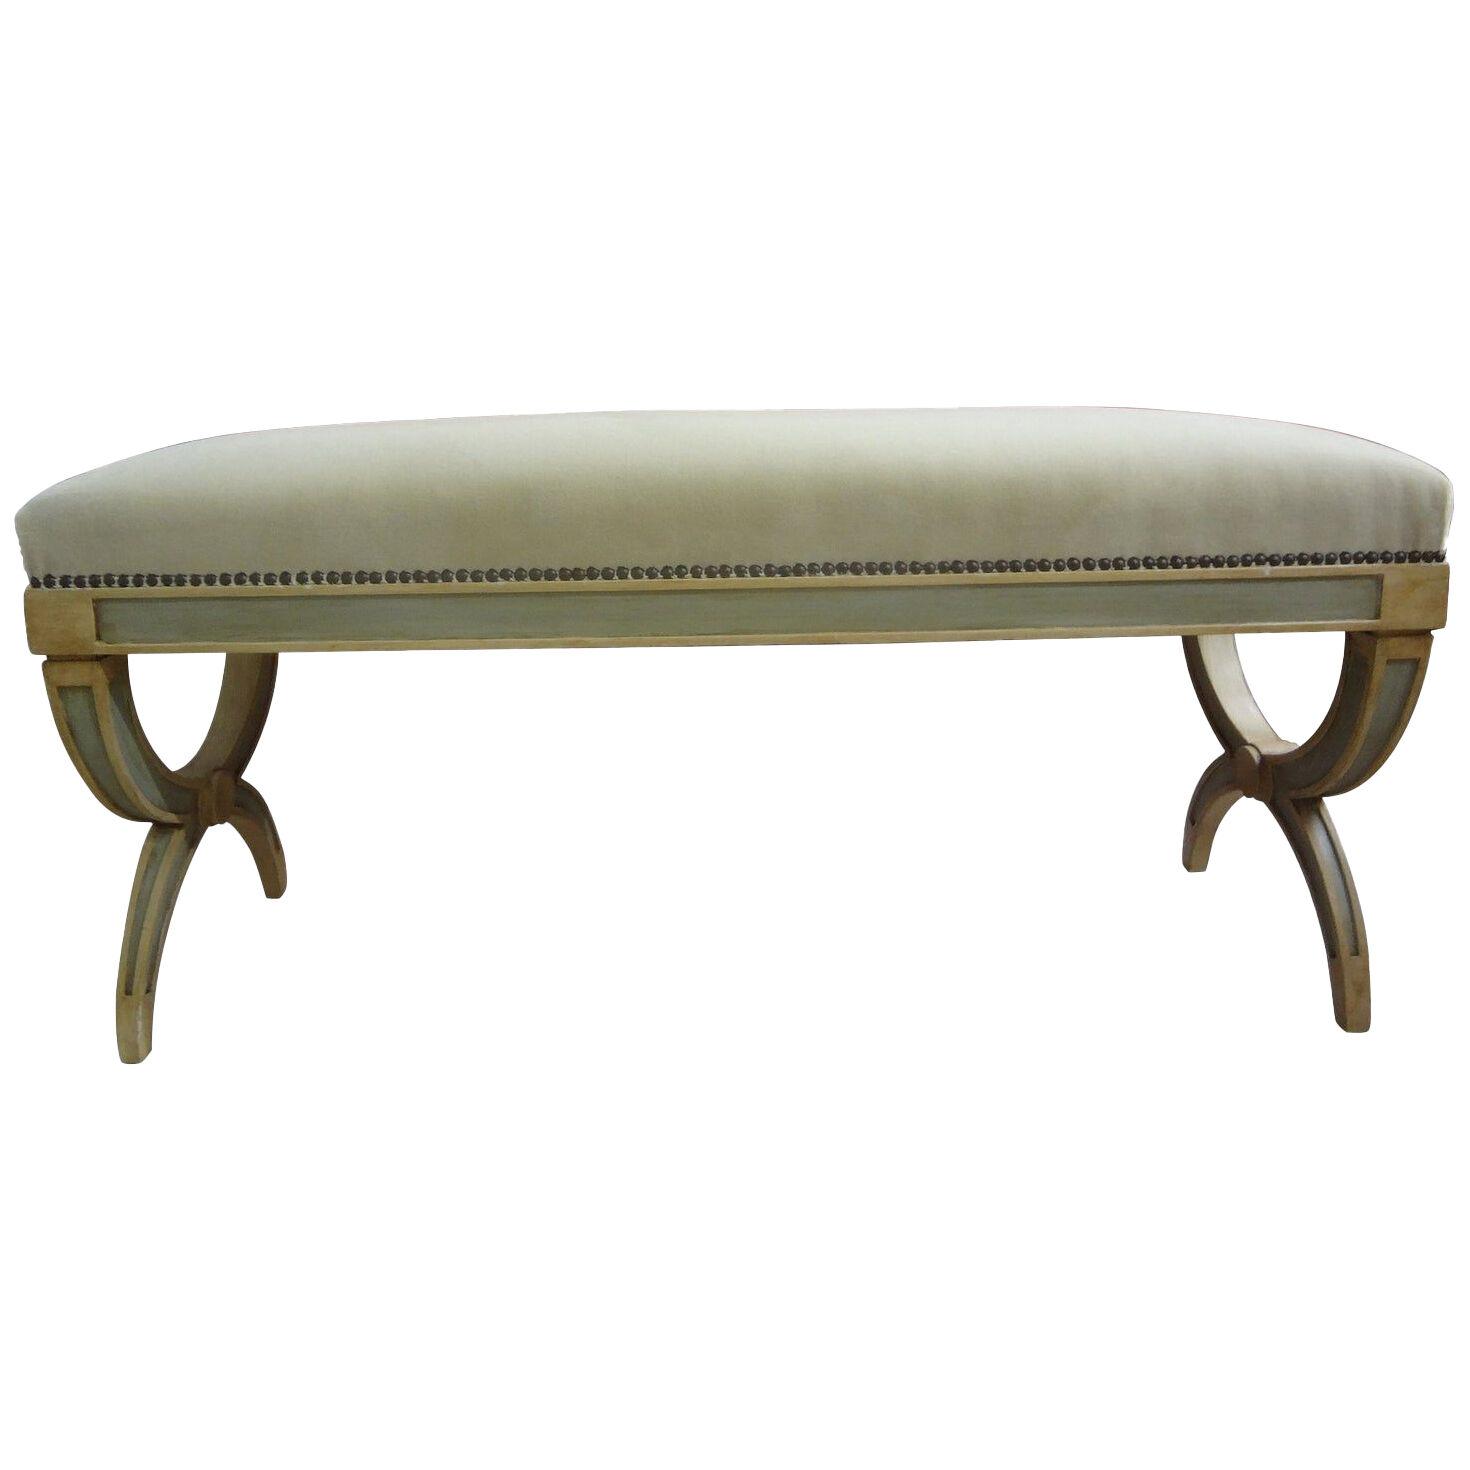 Italian Directoire-Neoclassical Style Painted Bench